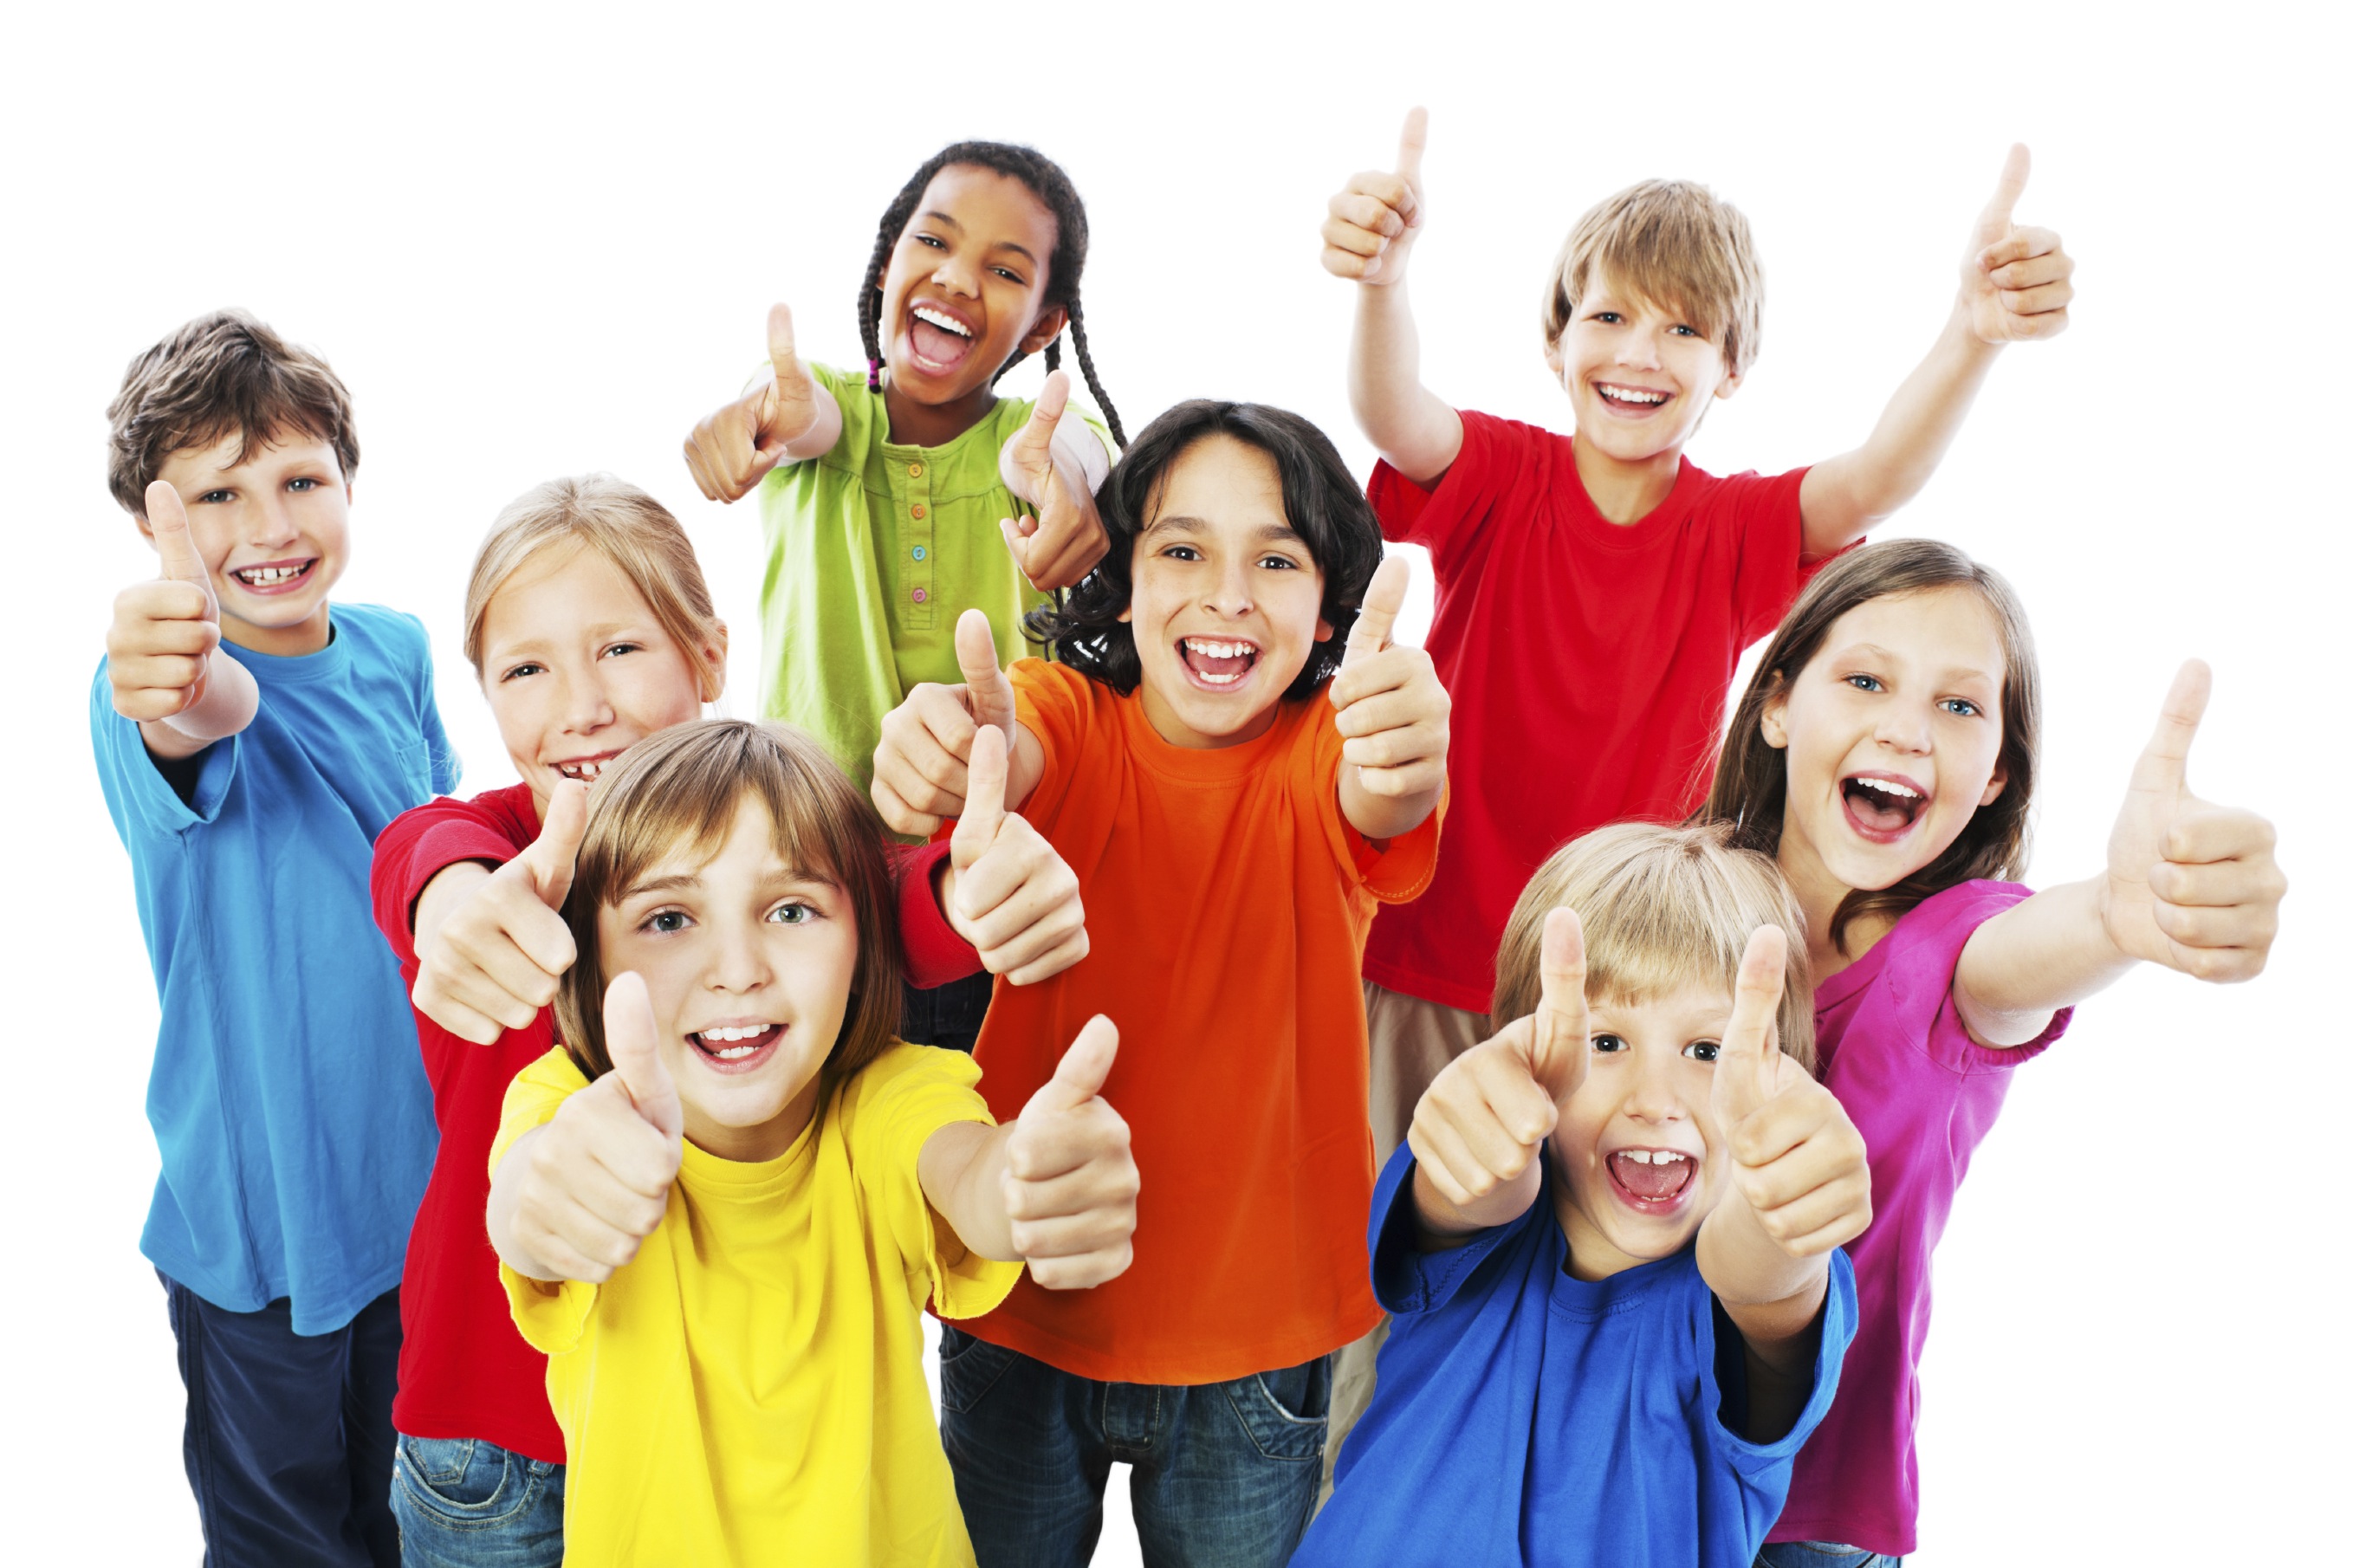 Group of kids with thumbs up